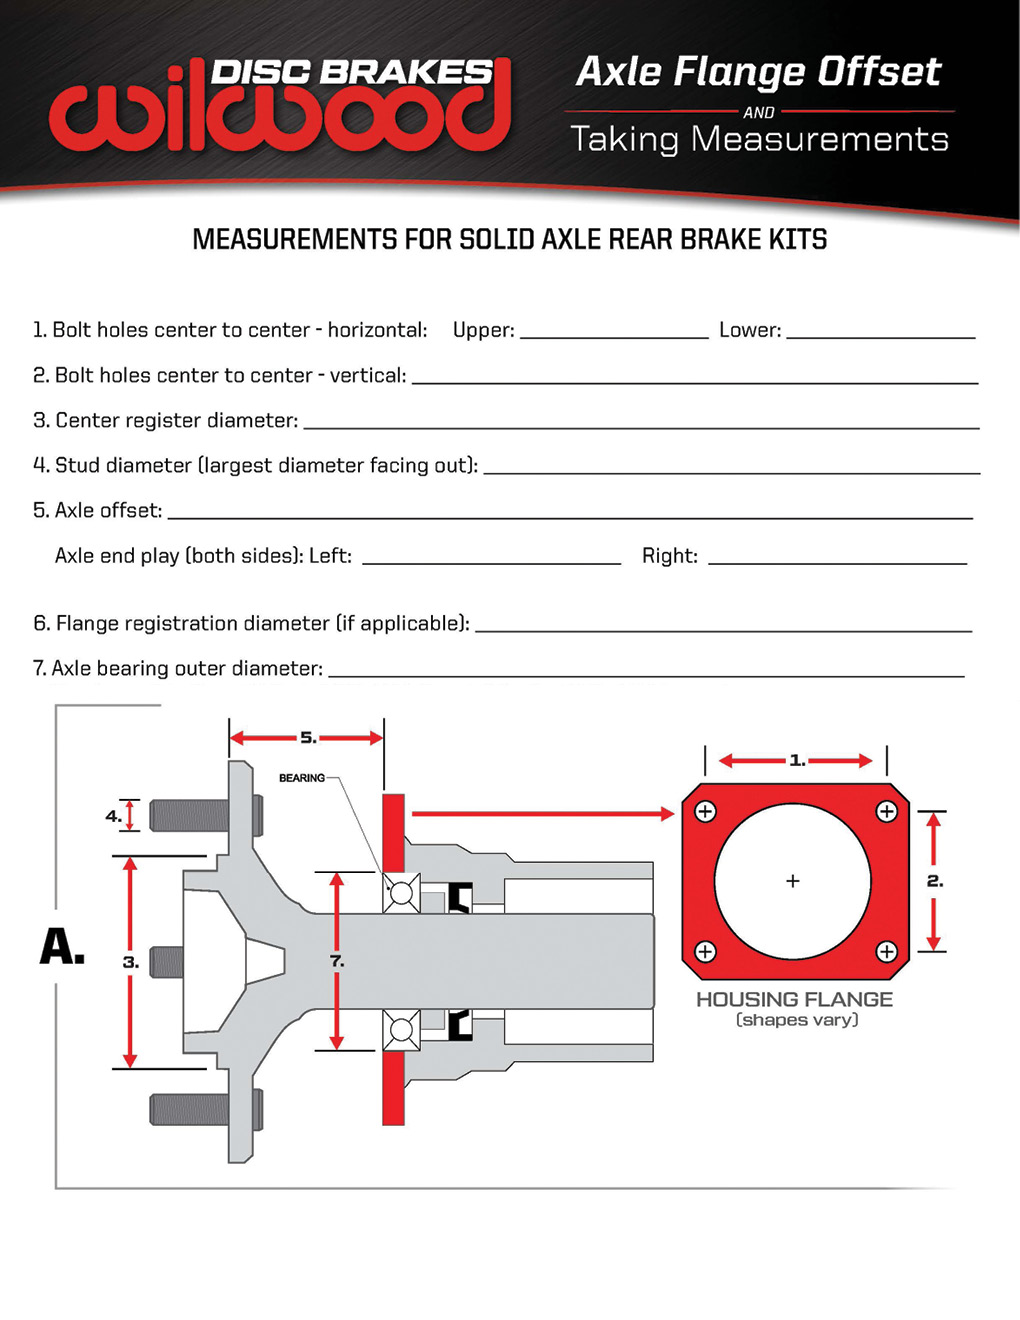 Determining the axle flange offset is critical to selecting the proper mounting brackets to properly locate hydraulic and EPB calipers in relationship to the rotors.